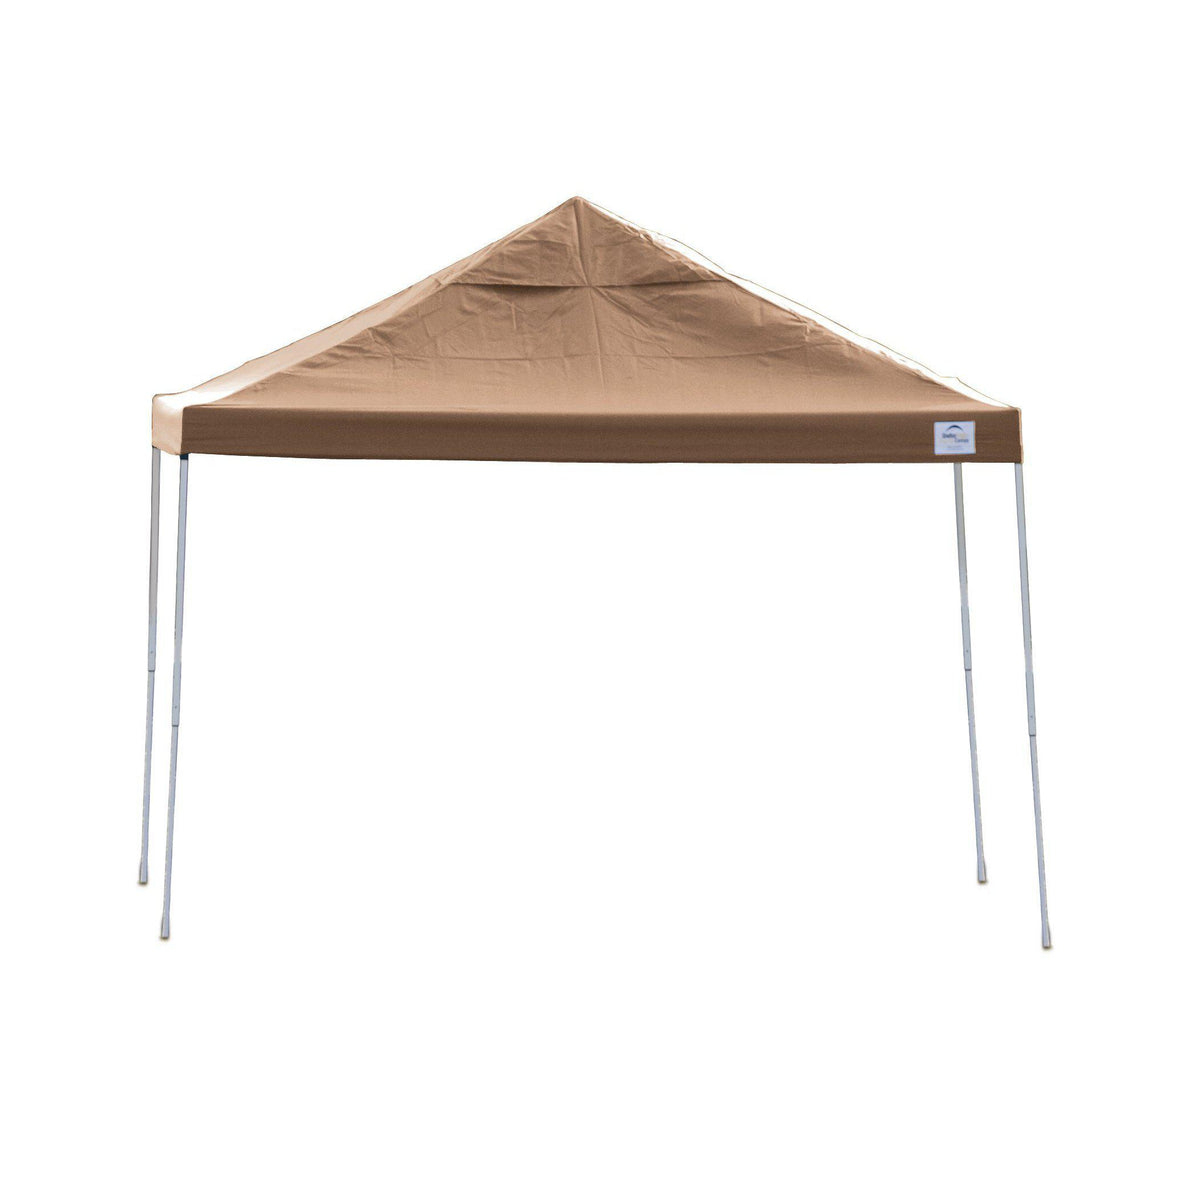 ShelterLogic Pro Series Straight Leg Pop-Up Canopy with Roller Bag, 12 x 12 ft.